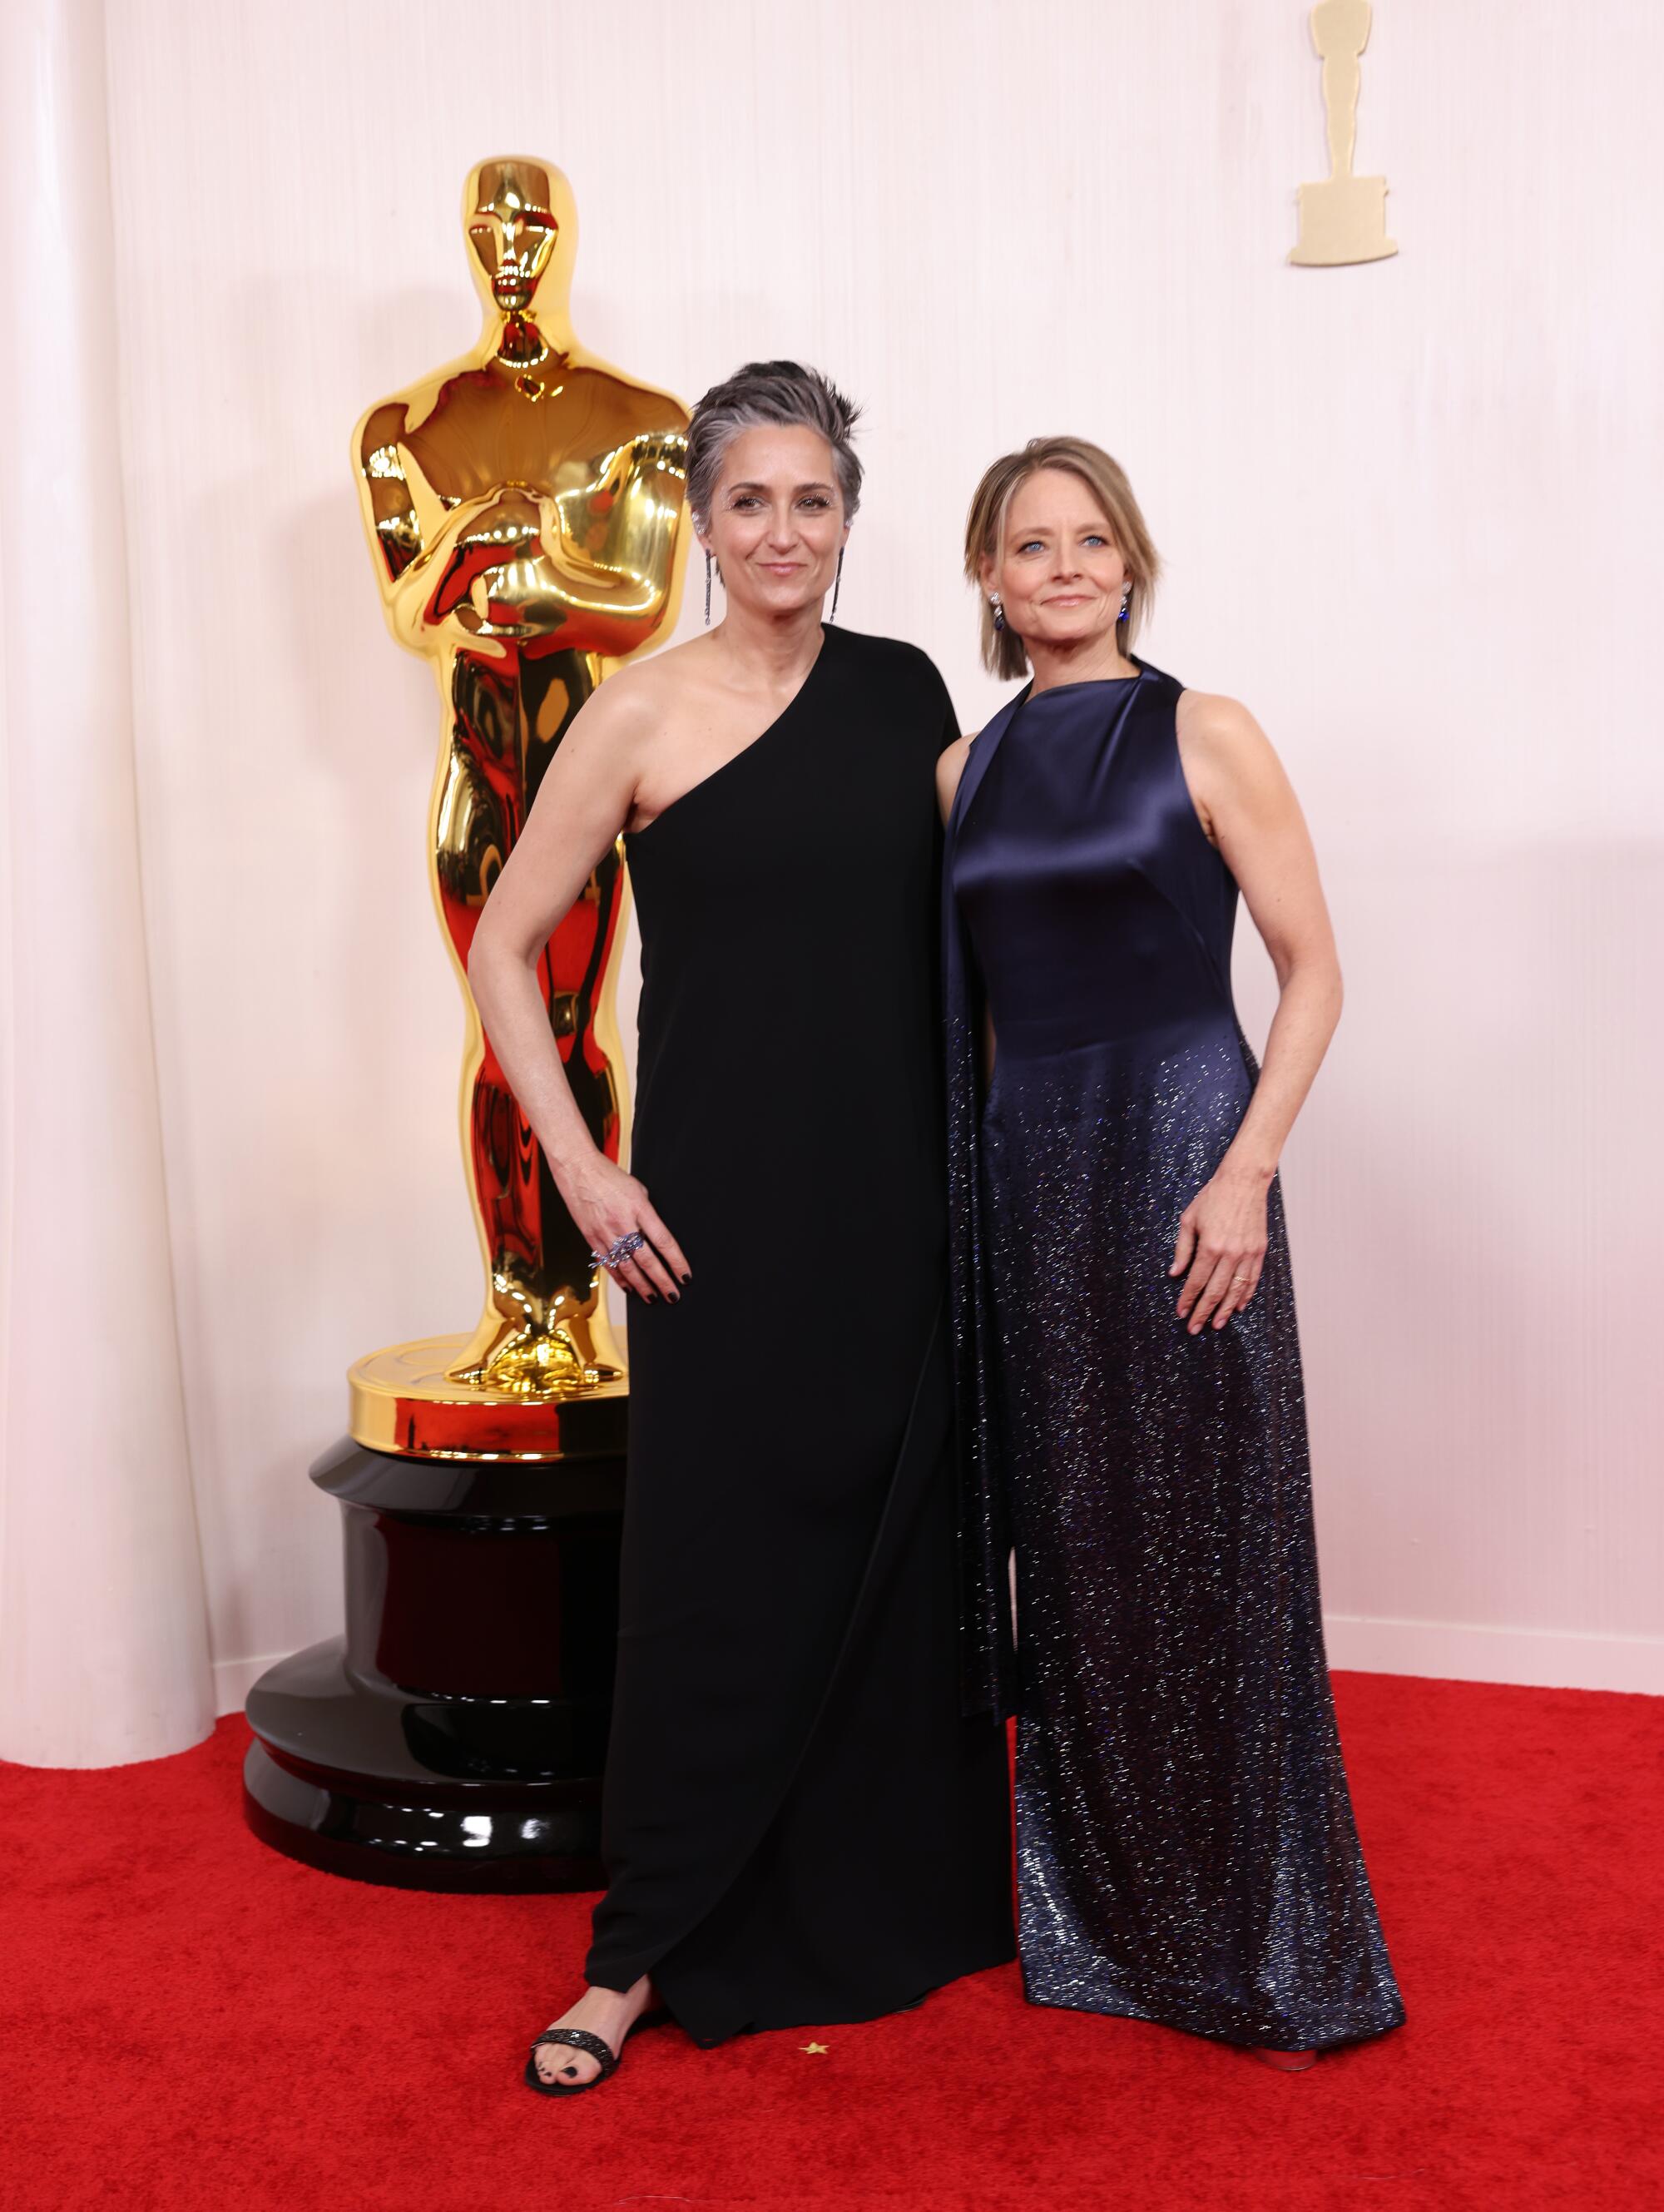 Alexandra Hedison, in a black one-shoulder gown, and Jodie Foster, in a navy blue gown, pose for cameras. 